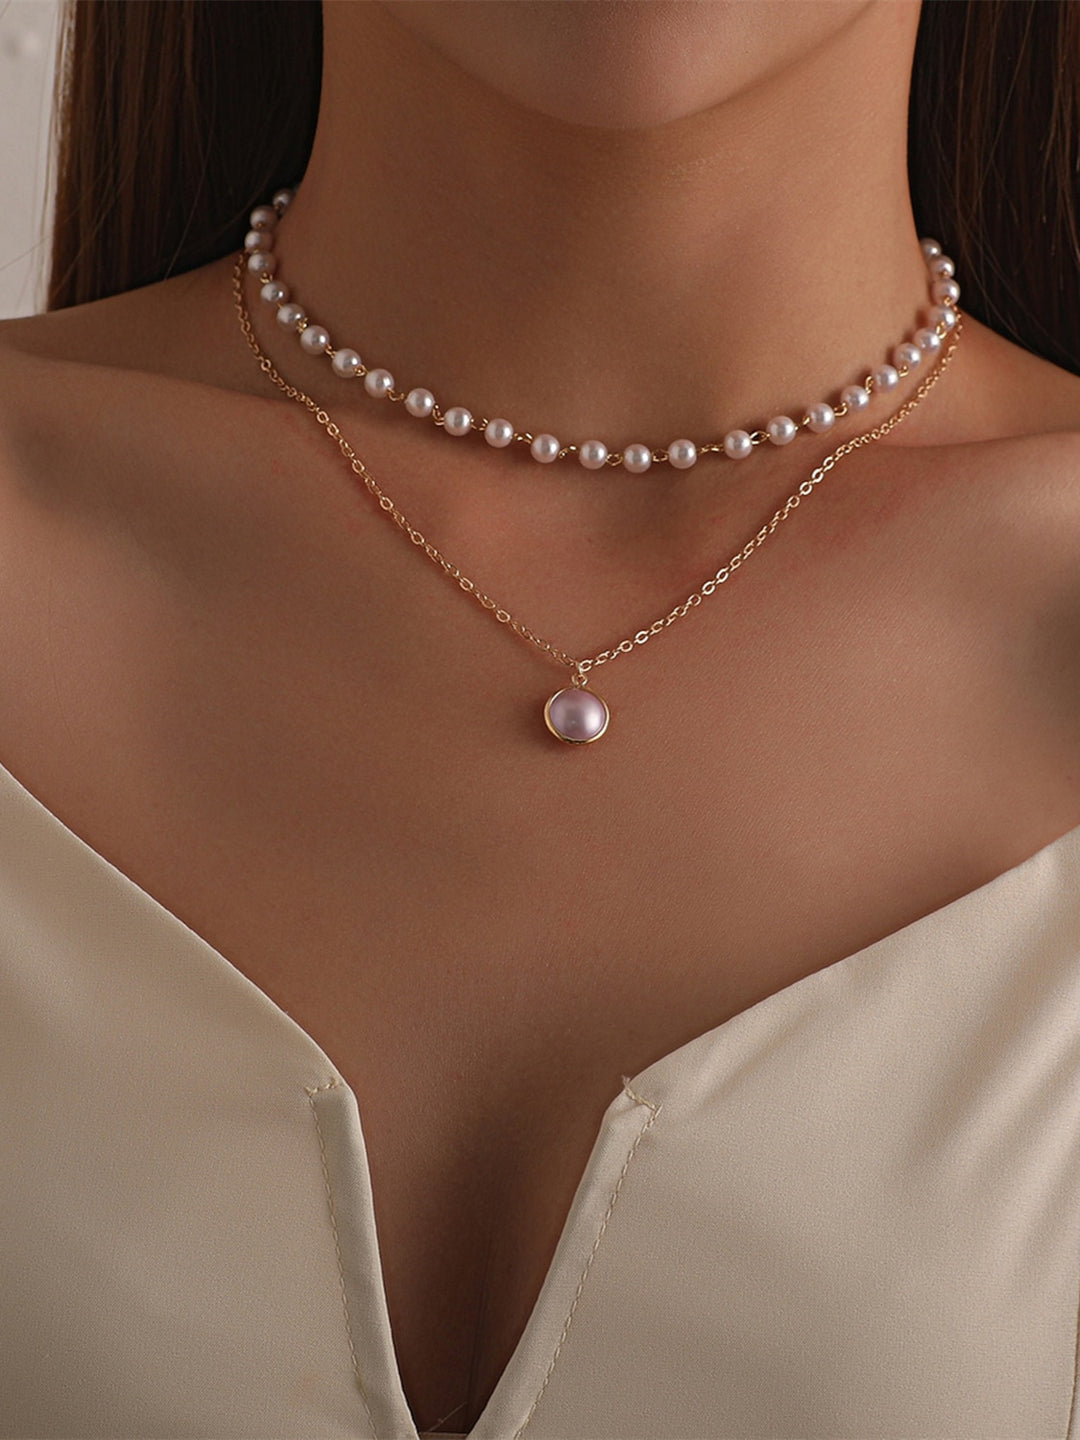 Imitation Pearl Chrome Necklace for Wedding Valentine's Day Daily Double Layered Necklace Wedding Jewelry